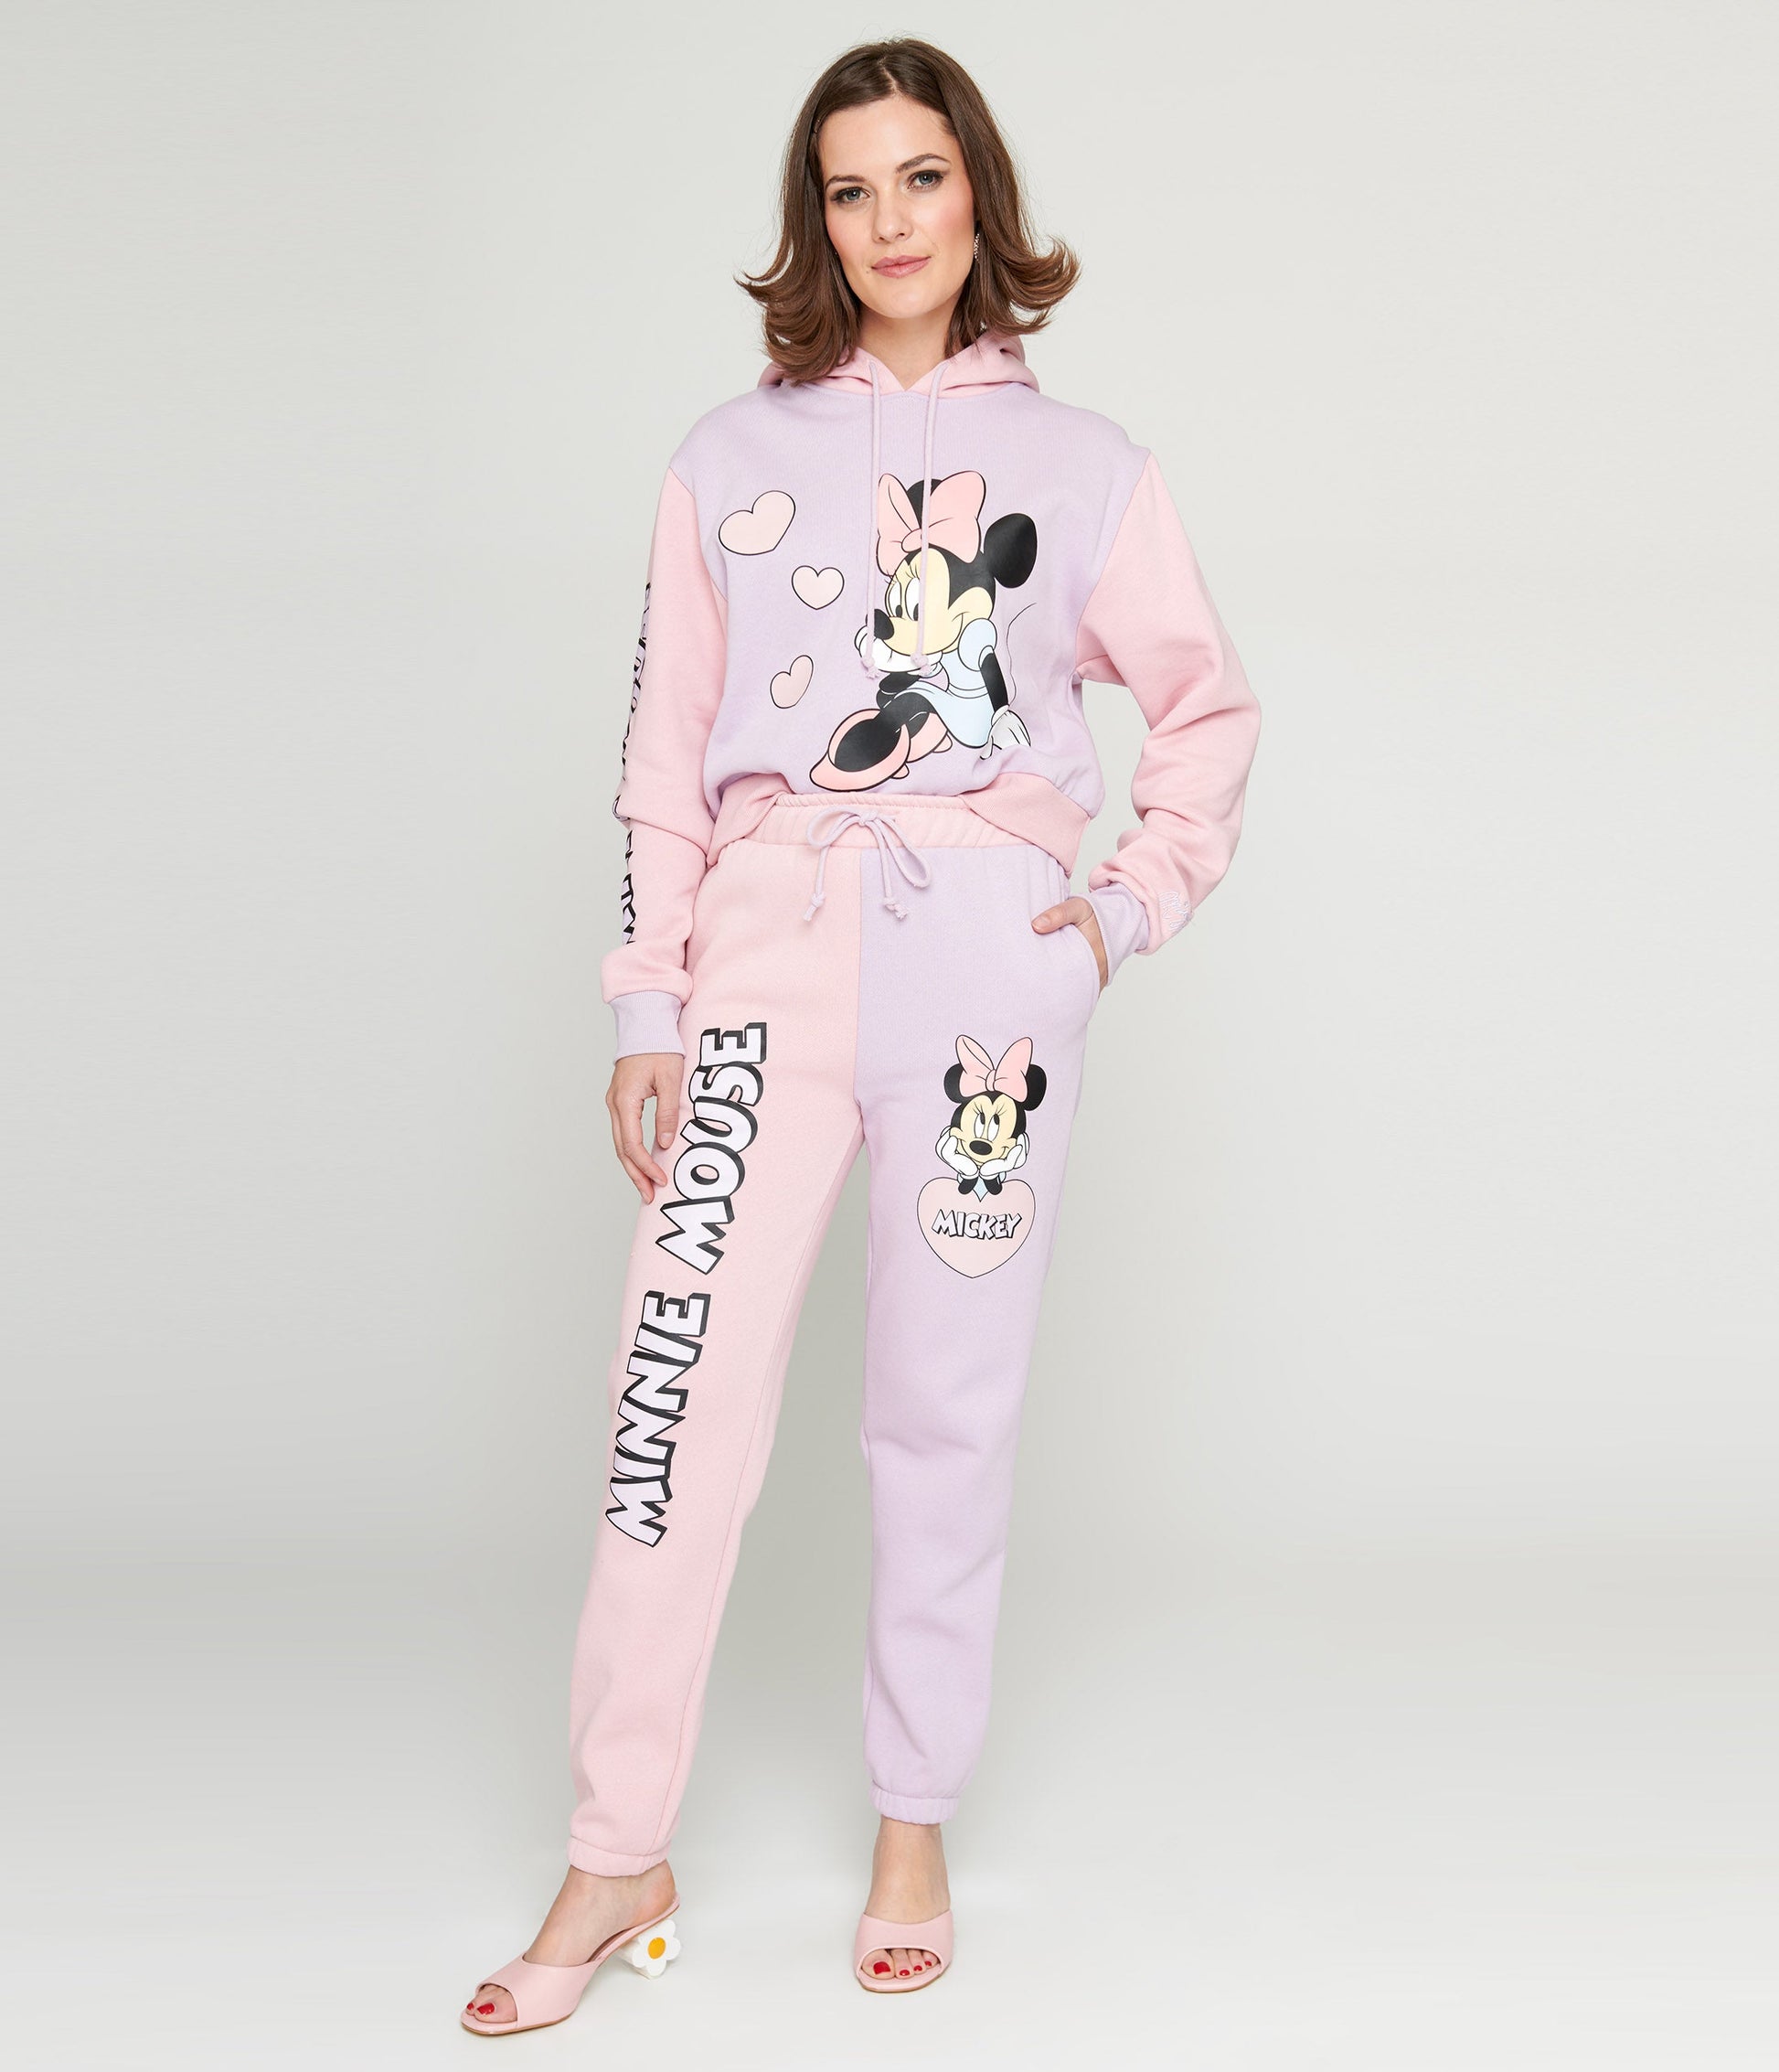 Minnie Mouse Joggers